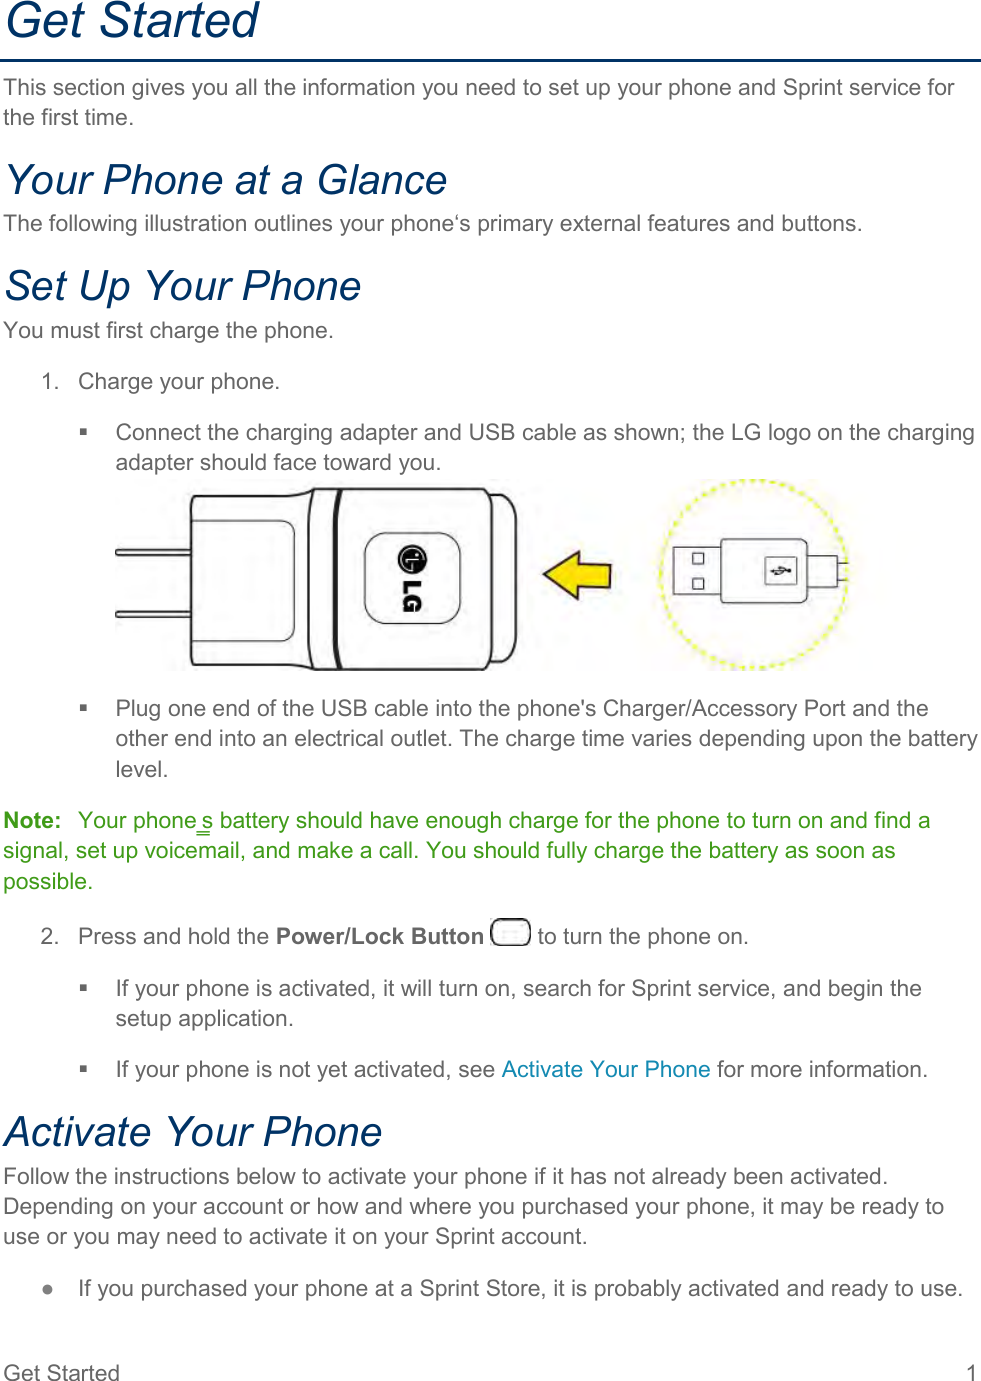 Get Started  1 Get Started This section gives you all the information you need to set up your phone and Sprint service for the first time. Your Phone at a Glance The following illustration outlines your phone‘s primary external features and buttons. Set Up Your Phone You must first charge the phone. 1.  Charge your phone.   Connect the charging adapter and USB cable as shown; the LG logo on the charging adapter should face toward you.    Plug one end of the USB cable into the phone&apos;s Charger/Accessory Port and the other end into an electrical outlet. The charge time varies depending upon the battery level. Note:  Your phone‗s battery should have enough charge for the phone to turn on and find a signal, set up voicemail, and make a call. You should fully charge the battery as soon as possible. 2.  Press and hold the Power/Lock Button   to turn the phone on.   If your phone is activated, it will turn on, search for Sprint service, and begin the setup application.   If your phone is not yet activated, see Activate Your Phone for more information. Activate Your Phone Follow the instructions below to activate your phone if it has not already been activated. Depending on your account or how and where you purchased your phone, it may be ready to use or you may need to activate it on your Sprint account. ●  If you purchased your phone at a Sprint Store, it is probably activated and ready to use. 